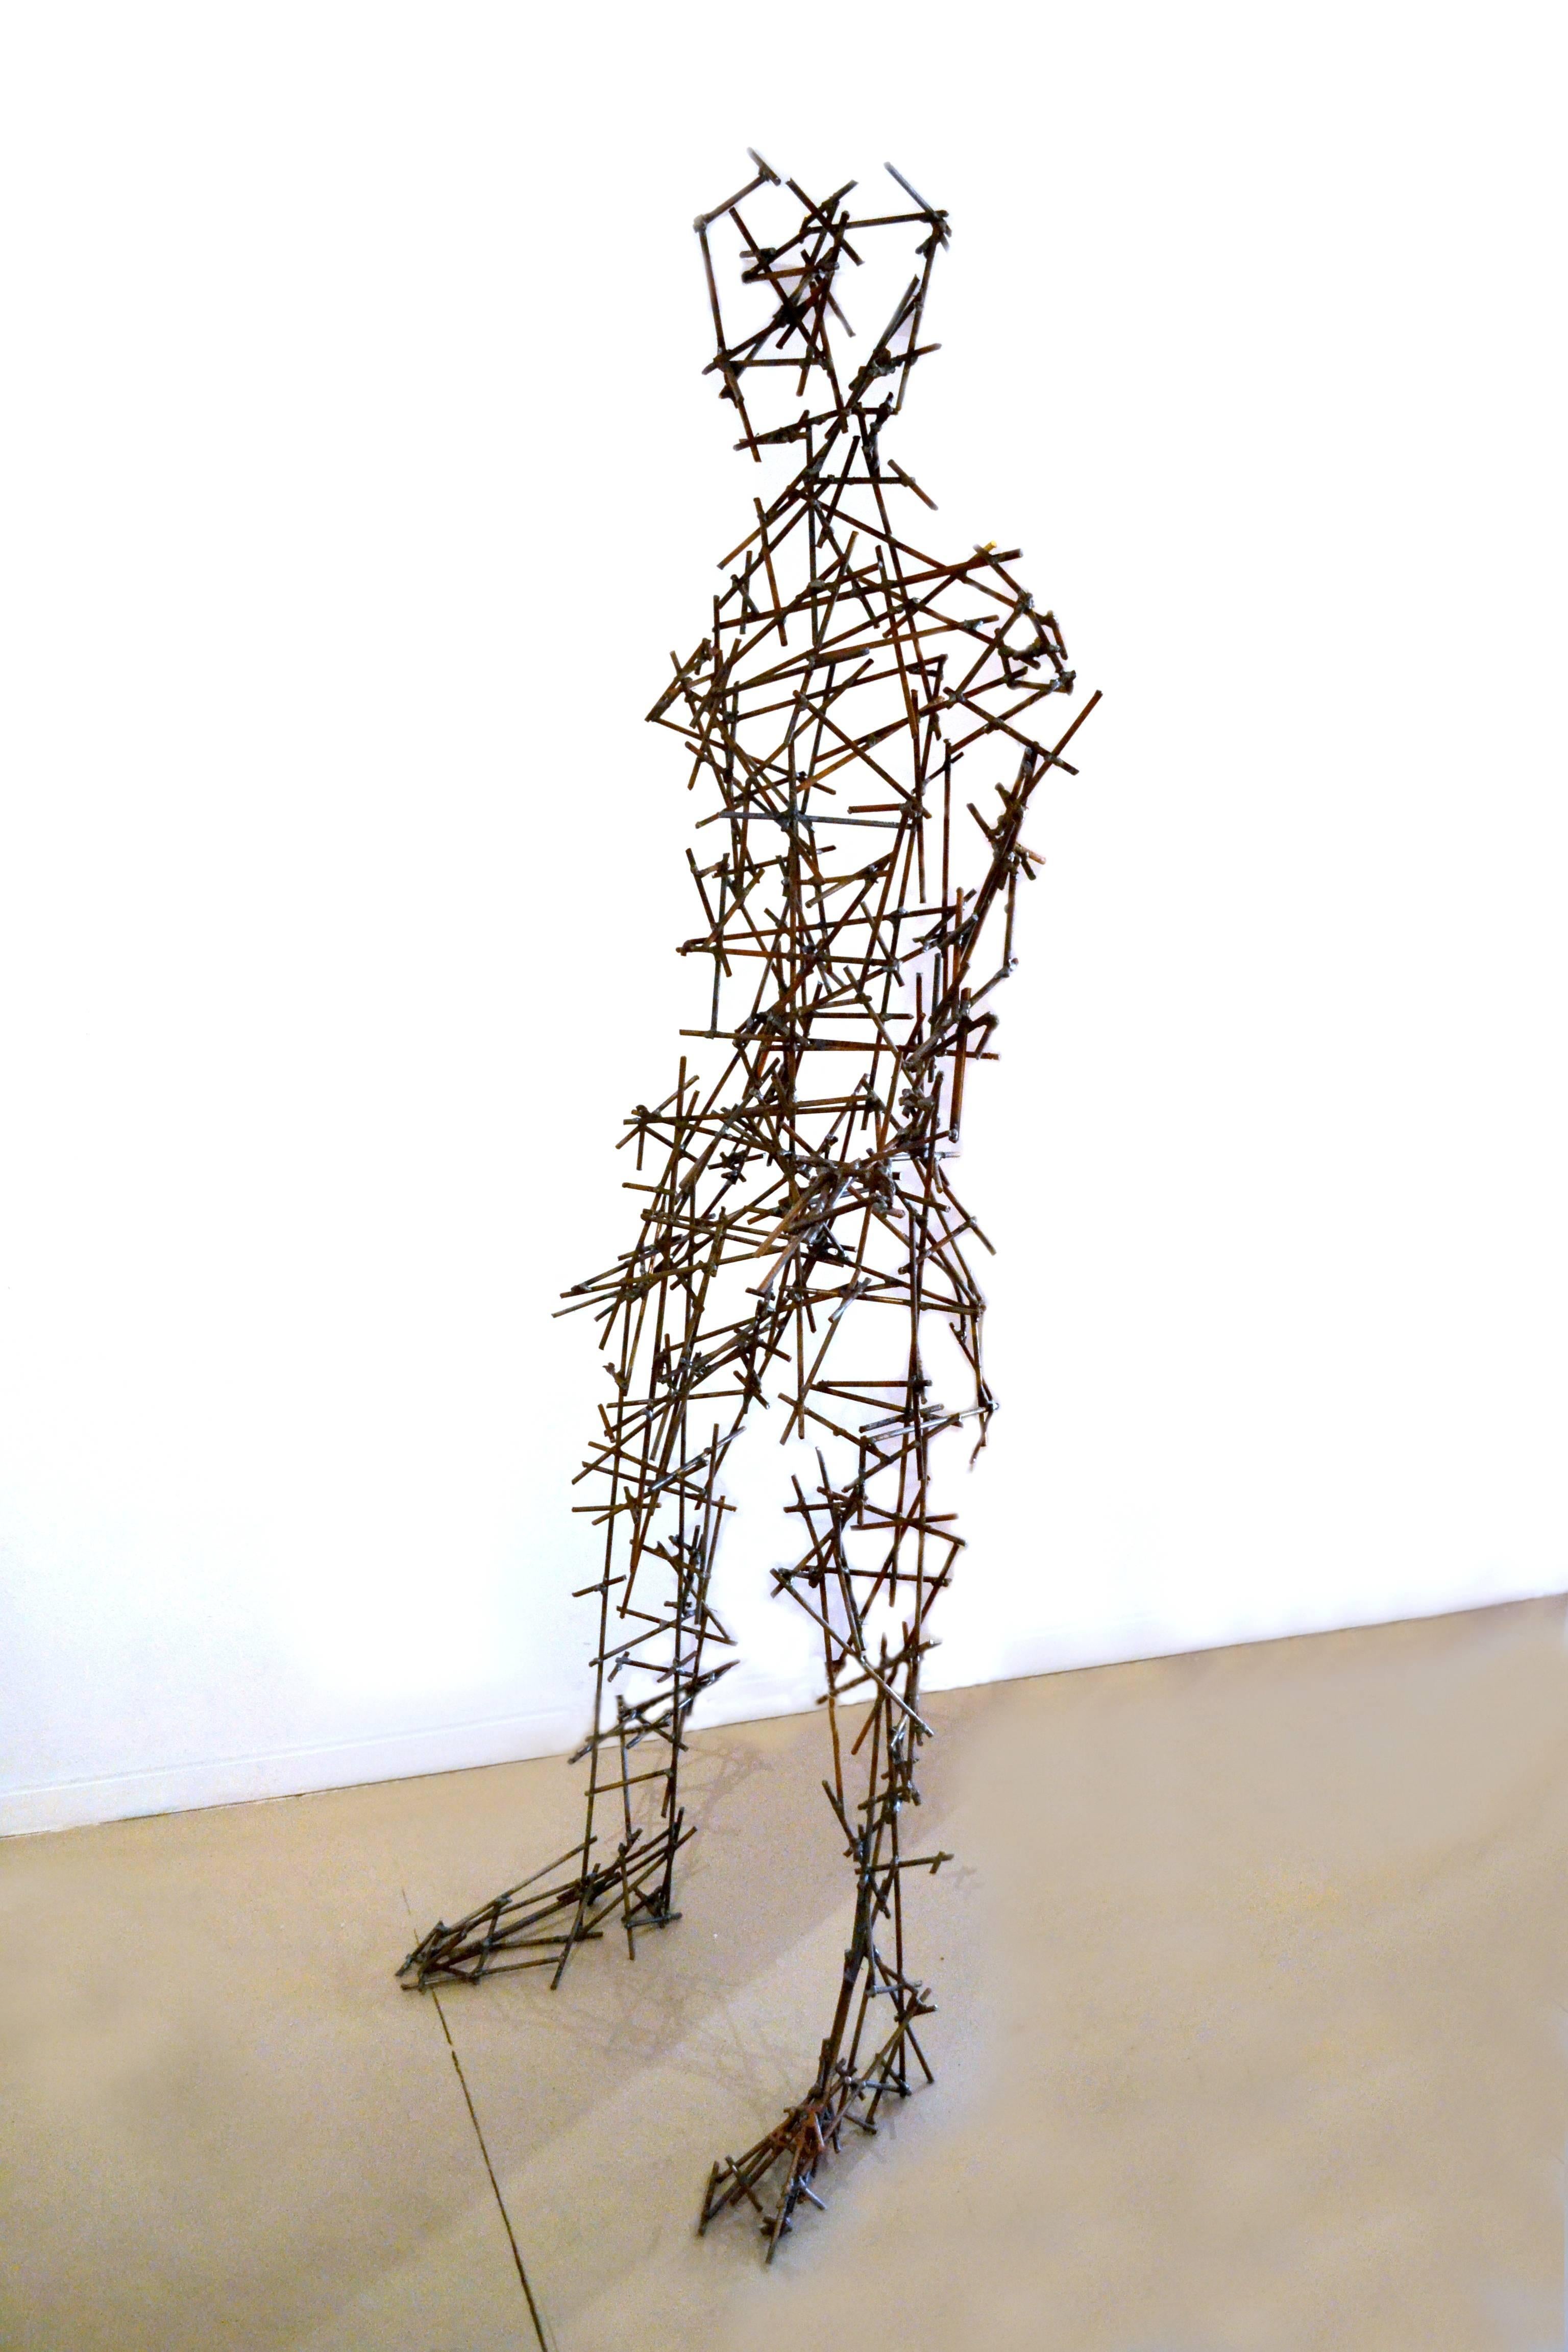 Stunning, whimsical and extraordinary in design and execution are but a few adjectives that describes this lifesize male figure. 

This abstract figure is fabricated out of steel posts that have been meticulously welded in place. The extended